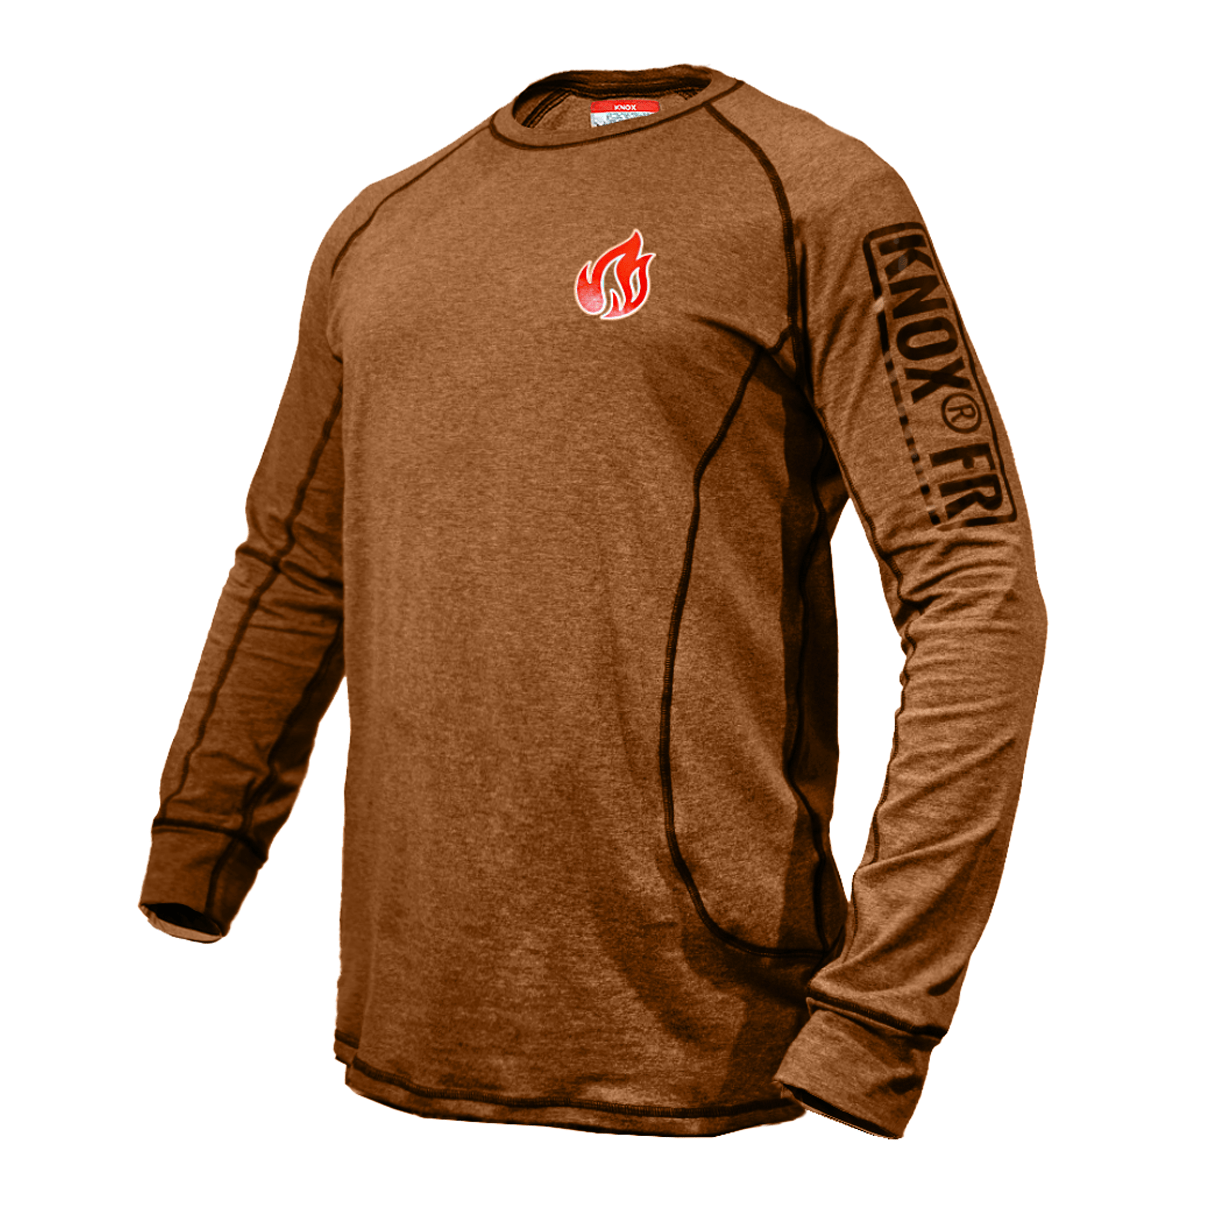 Knox Incorporated Apparel & Accessories Knox FR Long Sleeve Crew Shirt - Tan